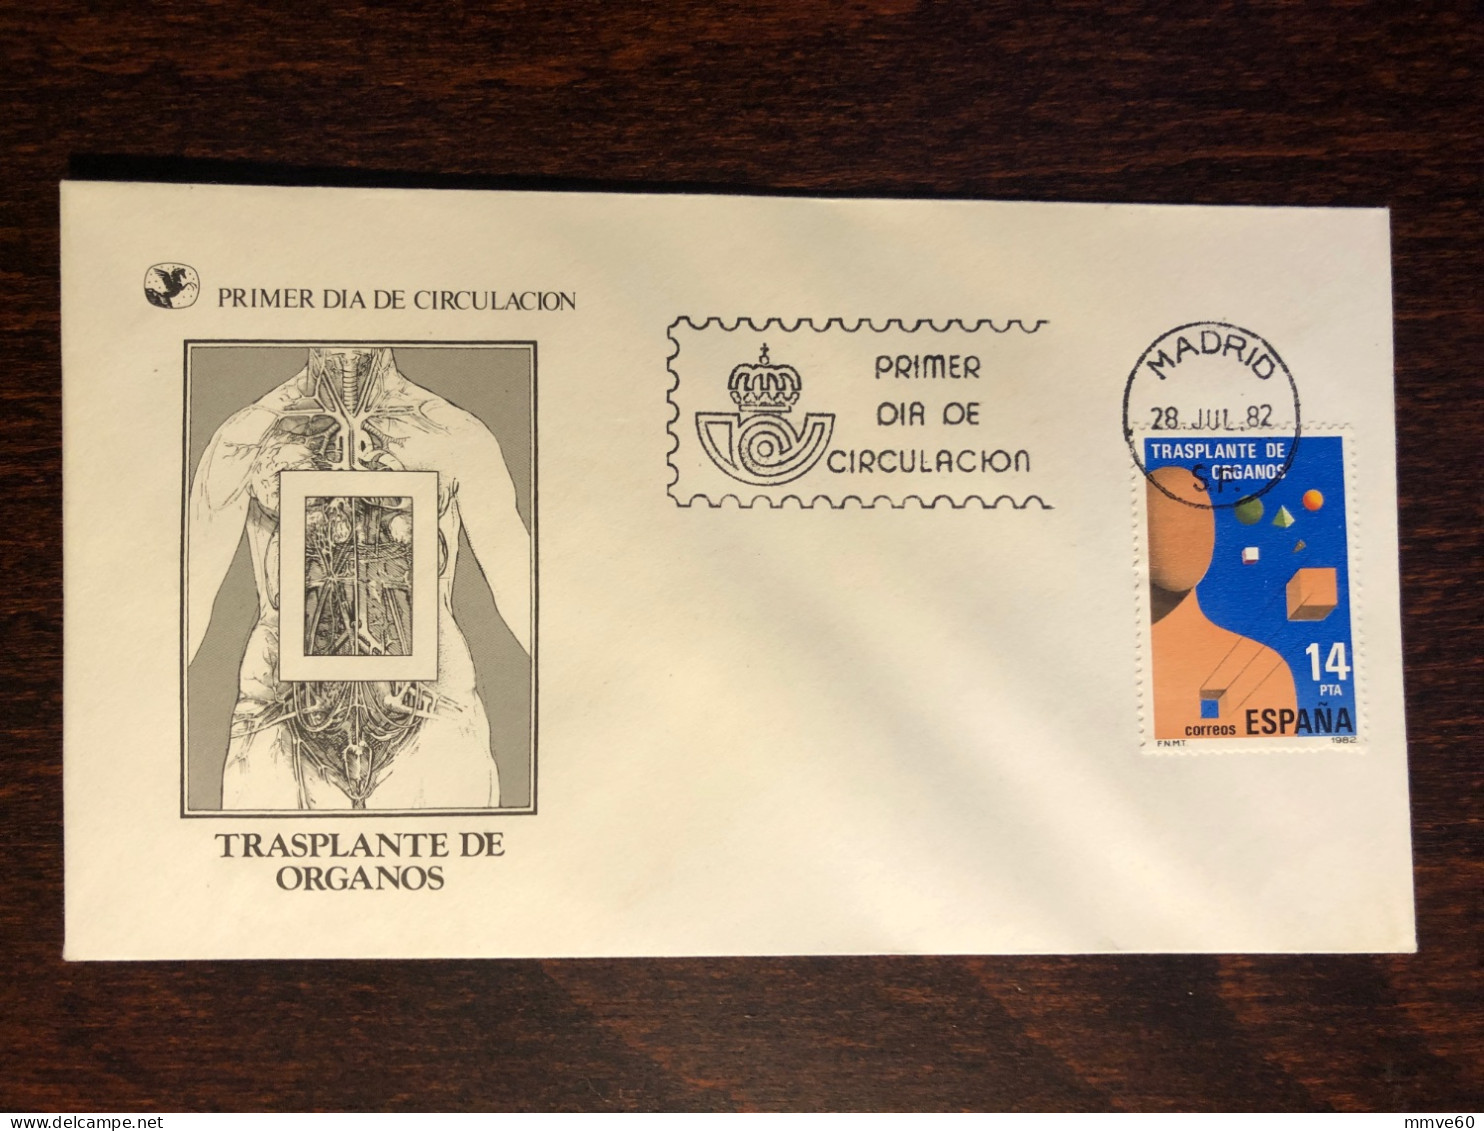 SPAIN FDC COVER 1982  YEAR ORGAN DONATION DONORS HEALTH MEDICINE STAMPS - FDC